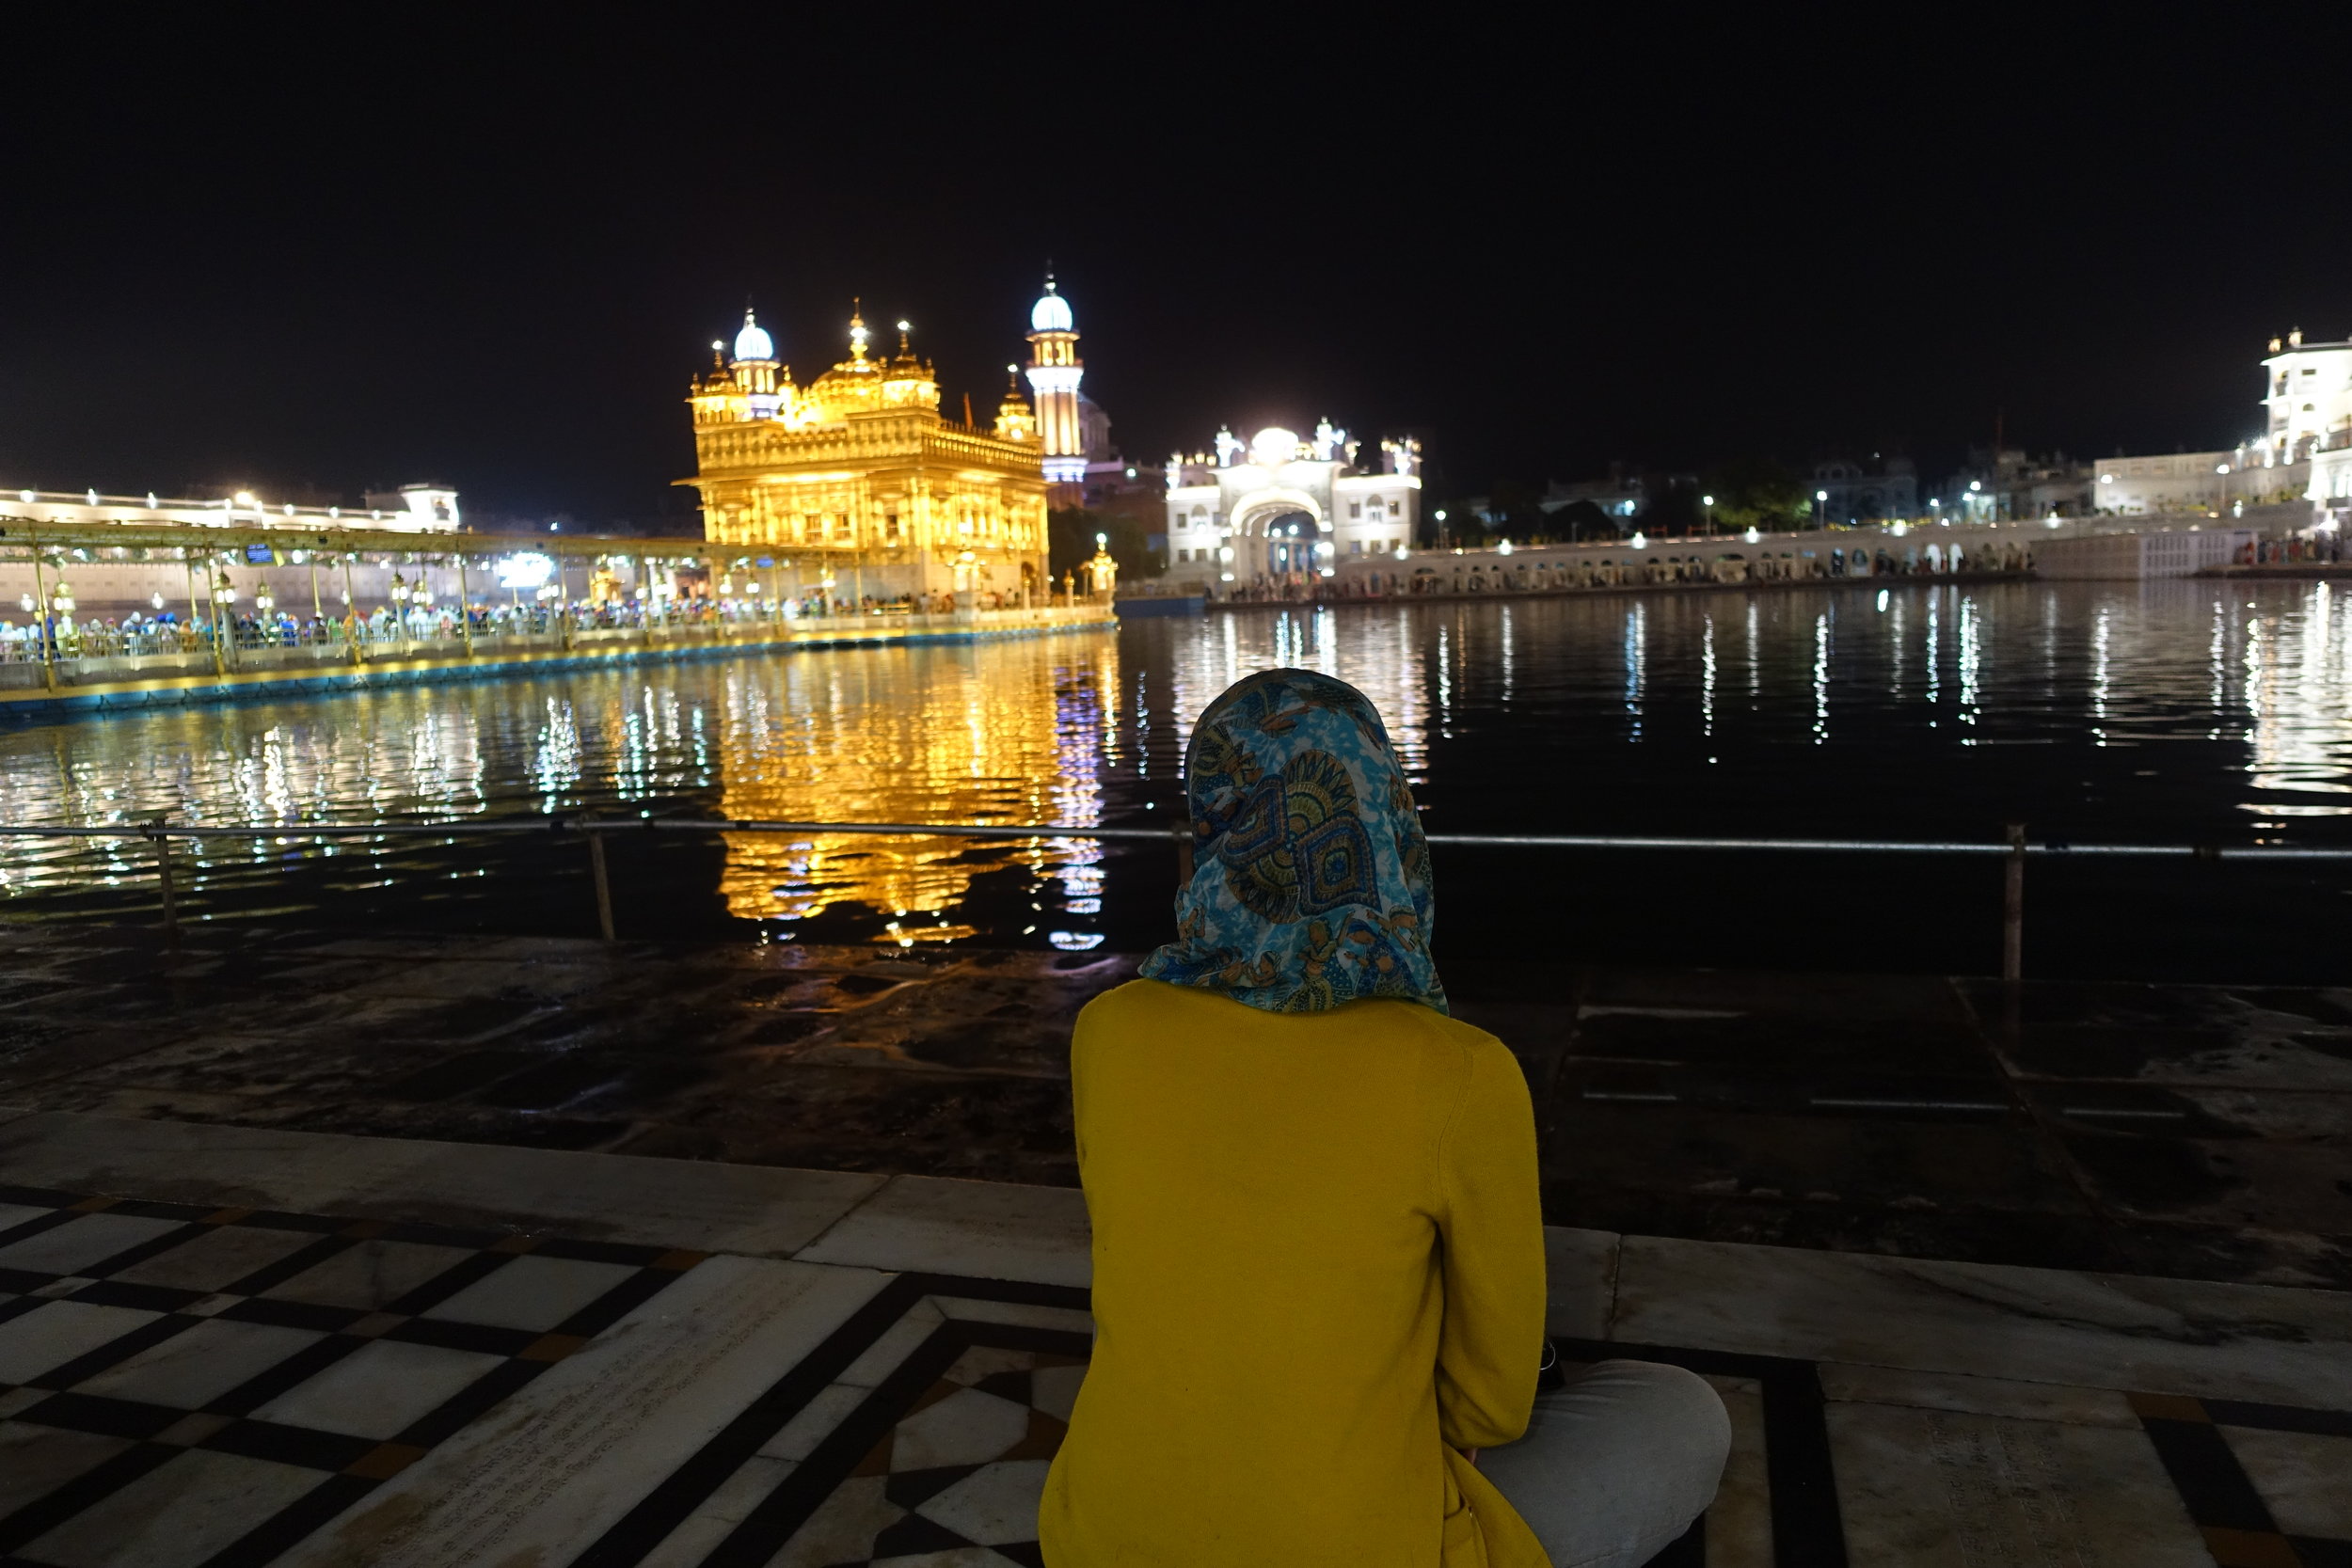  We visited the Golden Temple around 4 am one day, and this time we went inside. The lines were shorter because the holy book (Guru Granth Sahib) enters the temple a little later.  